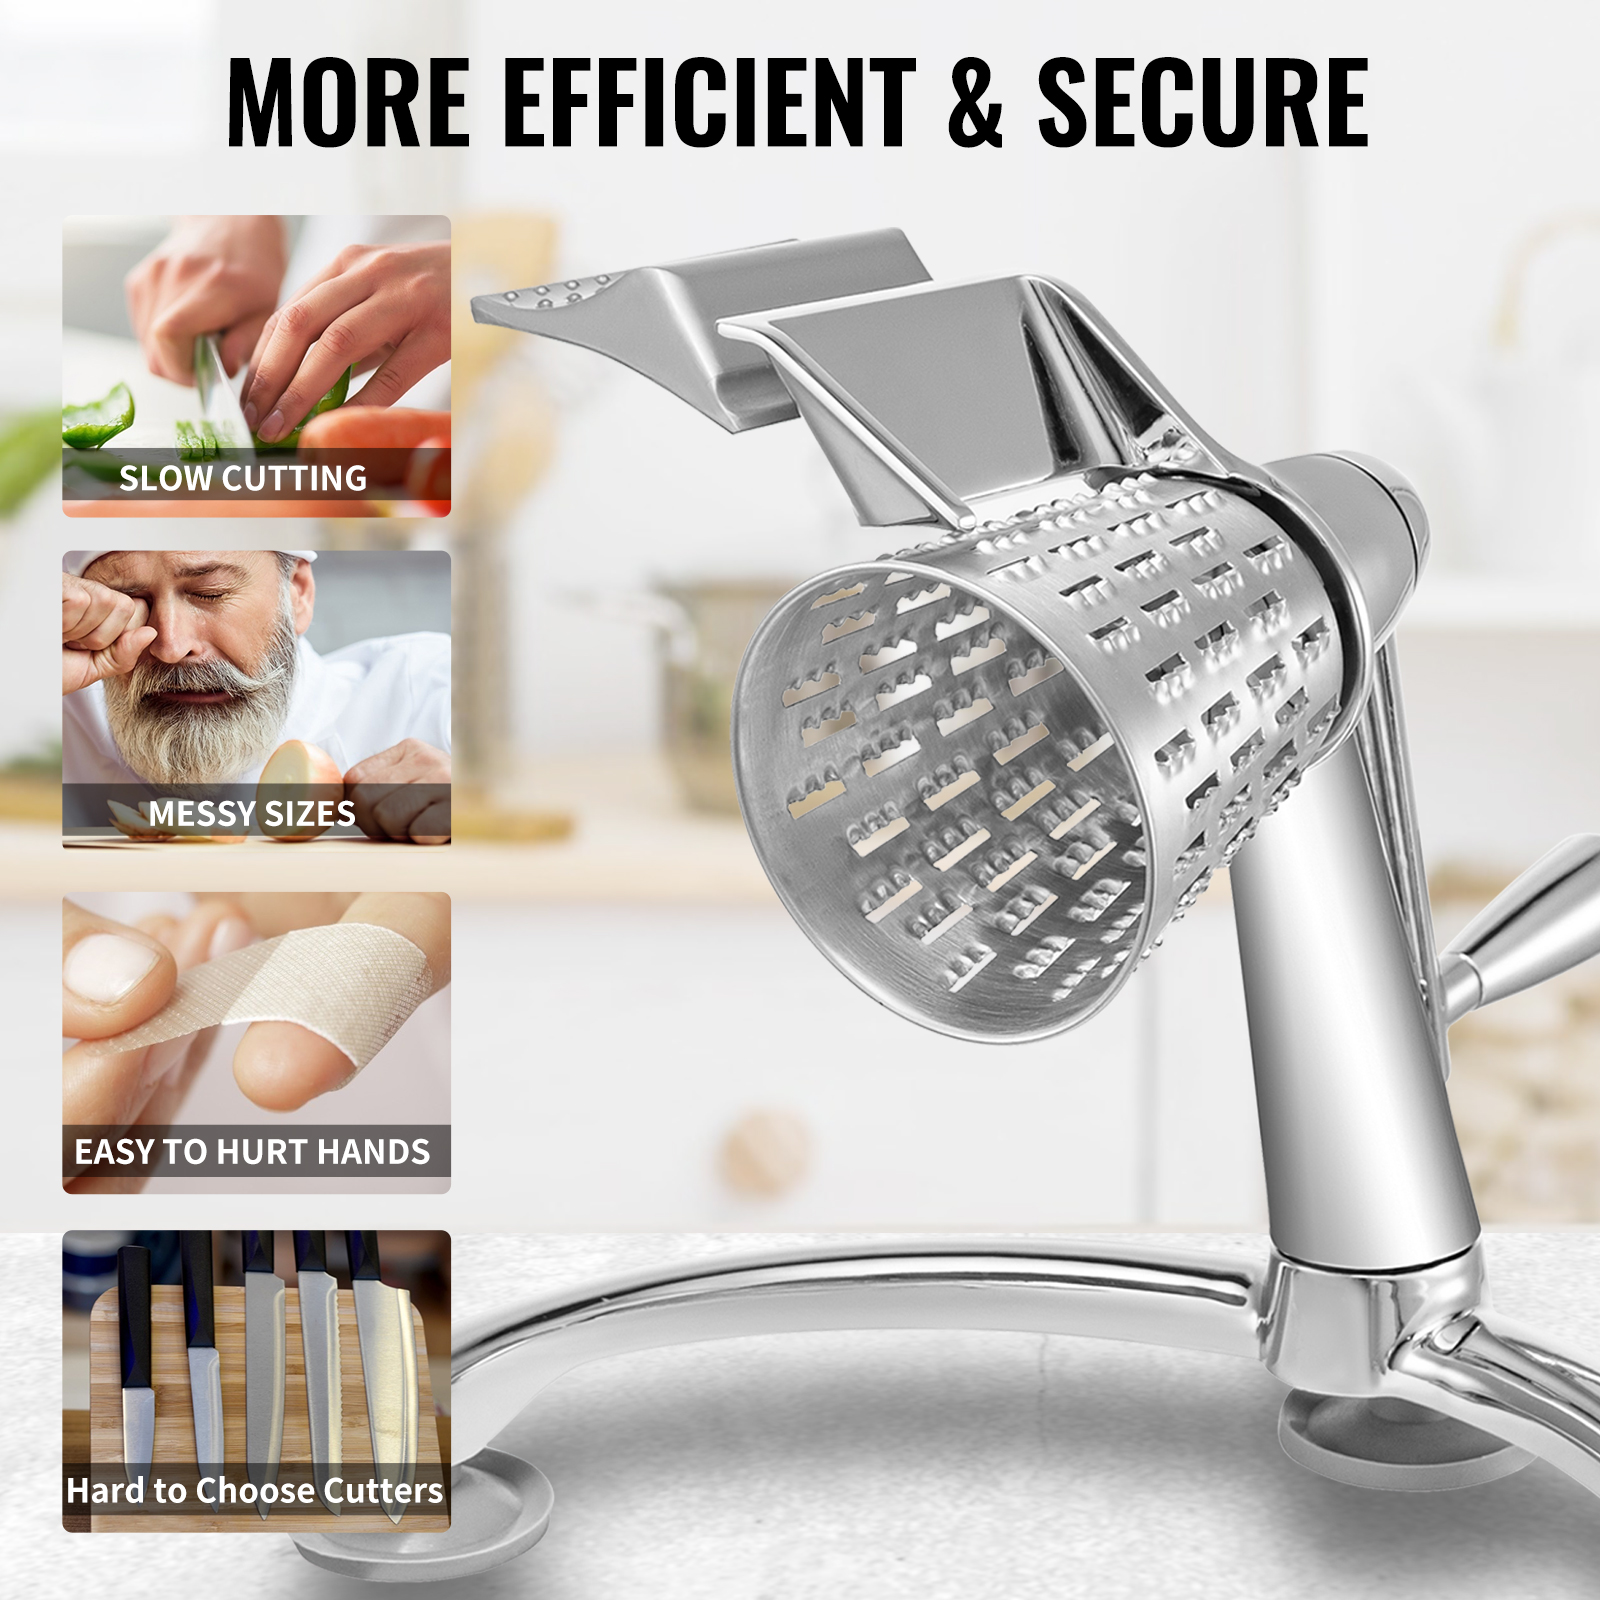 https://d2qc09rl1gfuof.cloudfront.net/product/QCJSCQPJ000000001/rotary-grater-rotary-grater-m100-6.jpg